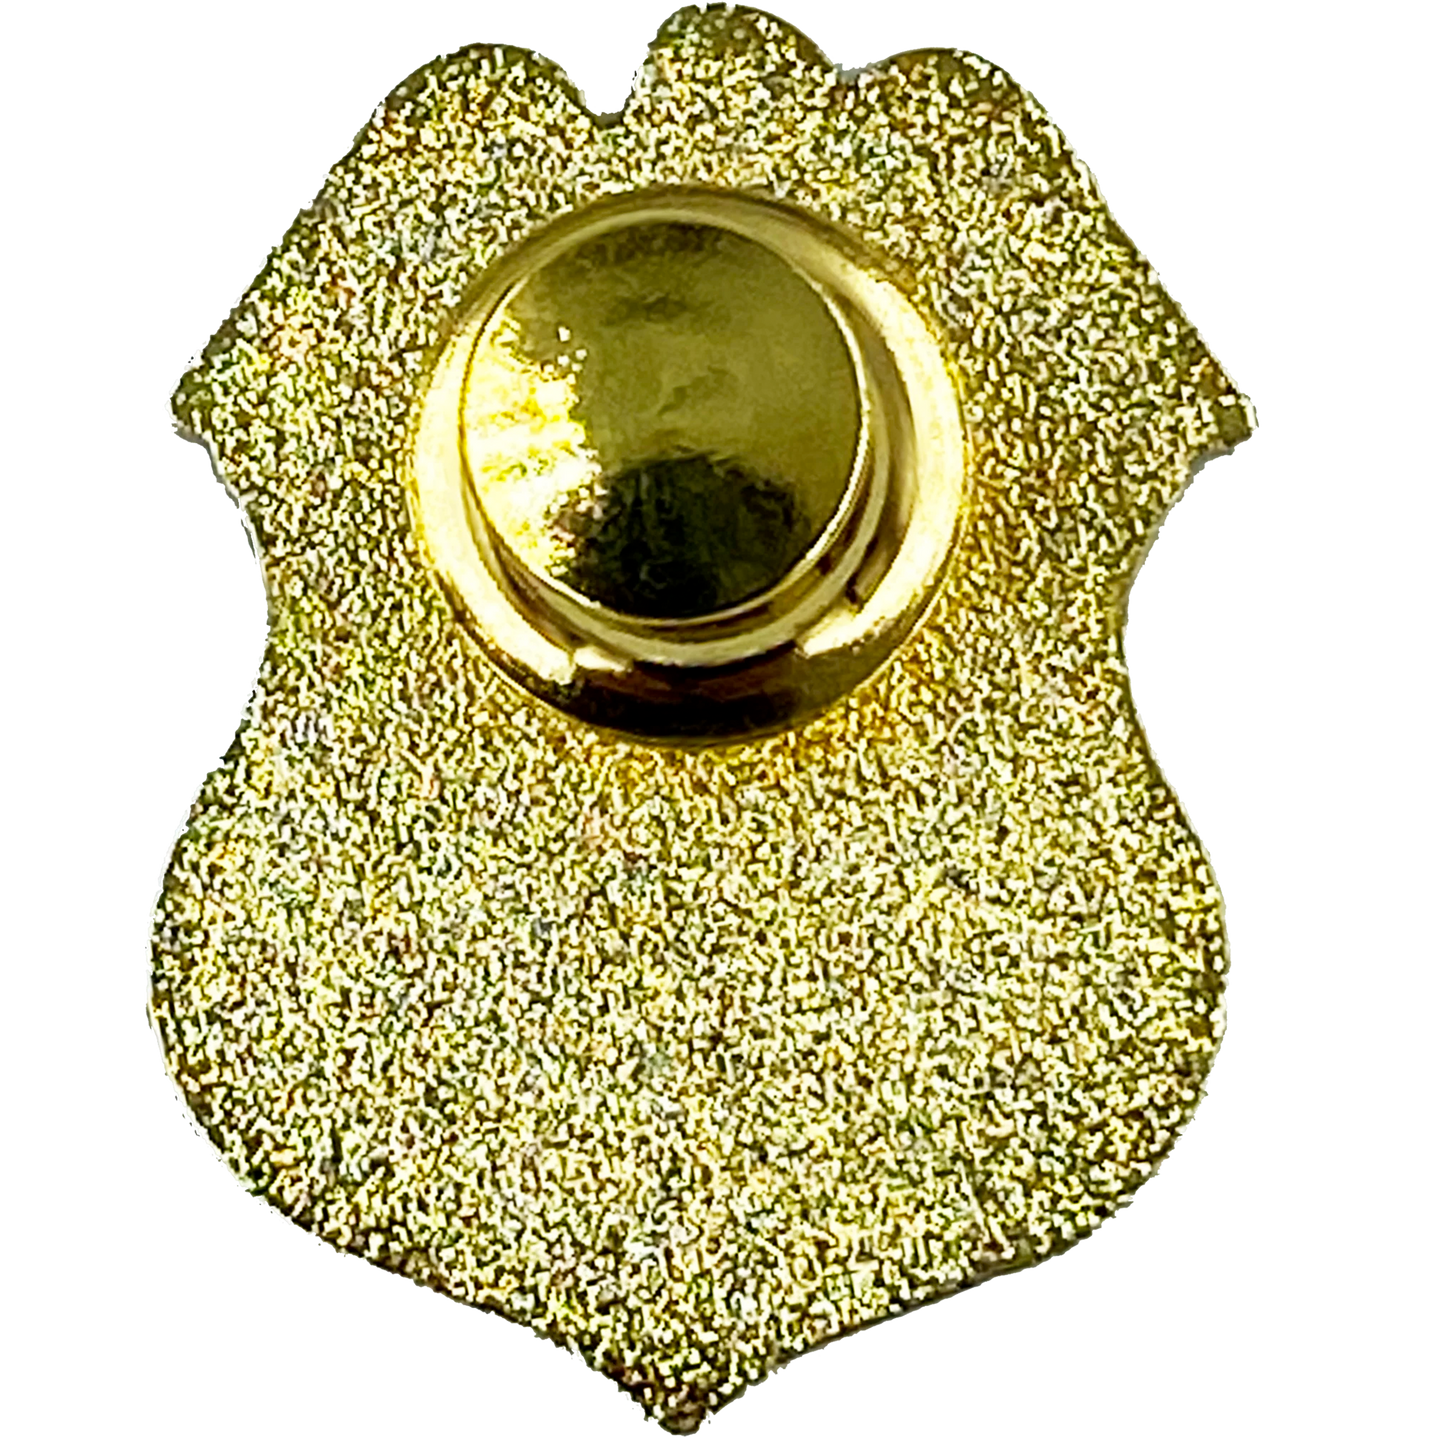 CL-009 ATF Special Agent Pin with deluxe spring loaded clasp